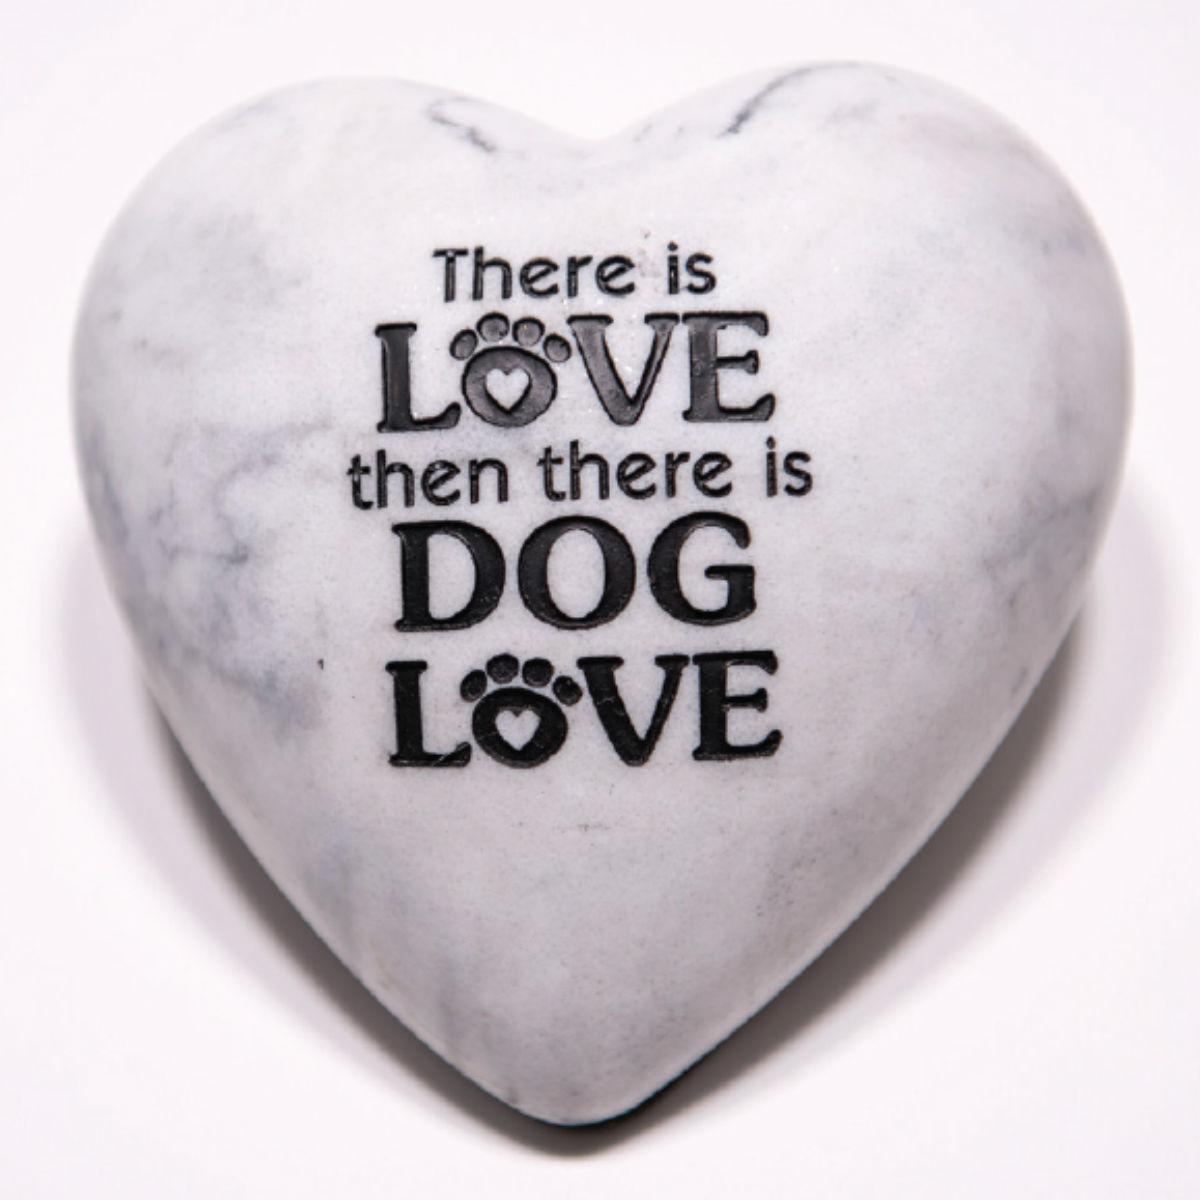 Dog Speak Inspirational Stone Paperweight - There is Love then there is Dog Love